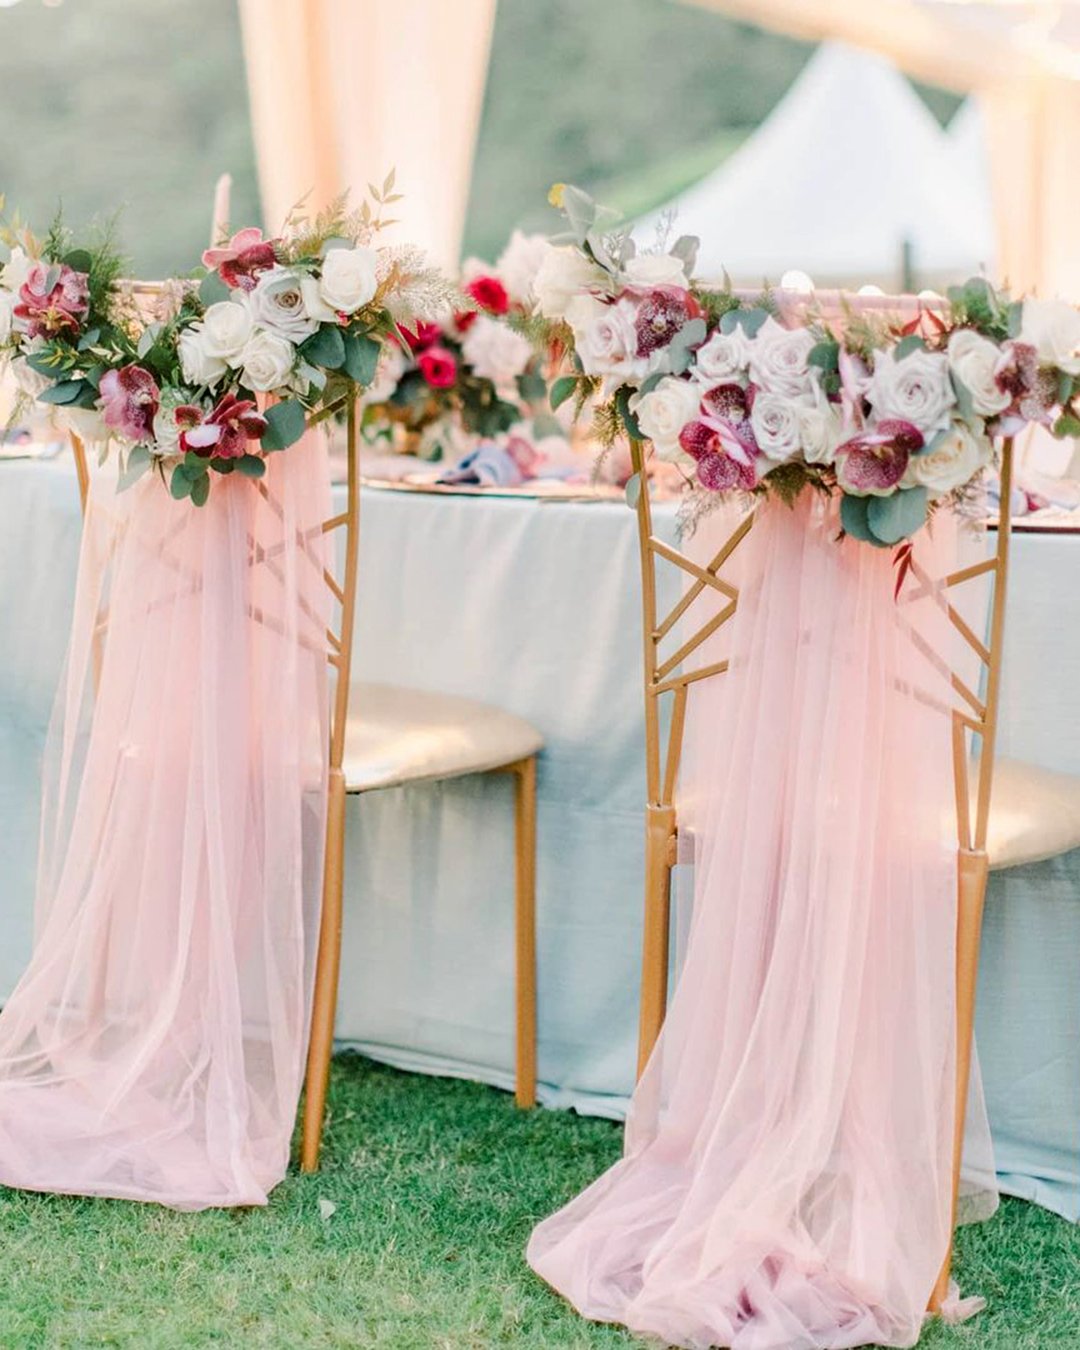 wedding decor ideas pink light cloth drappery with flowers on chairs phuket_wedding_planner